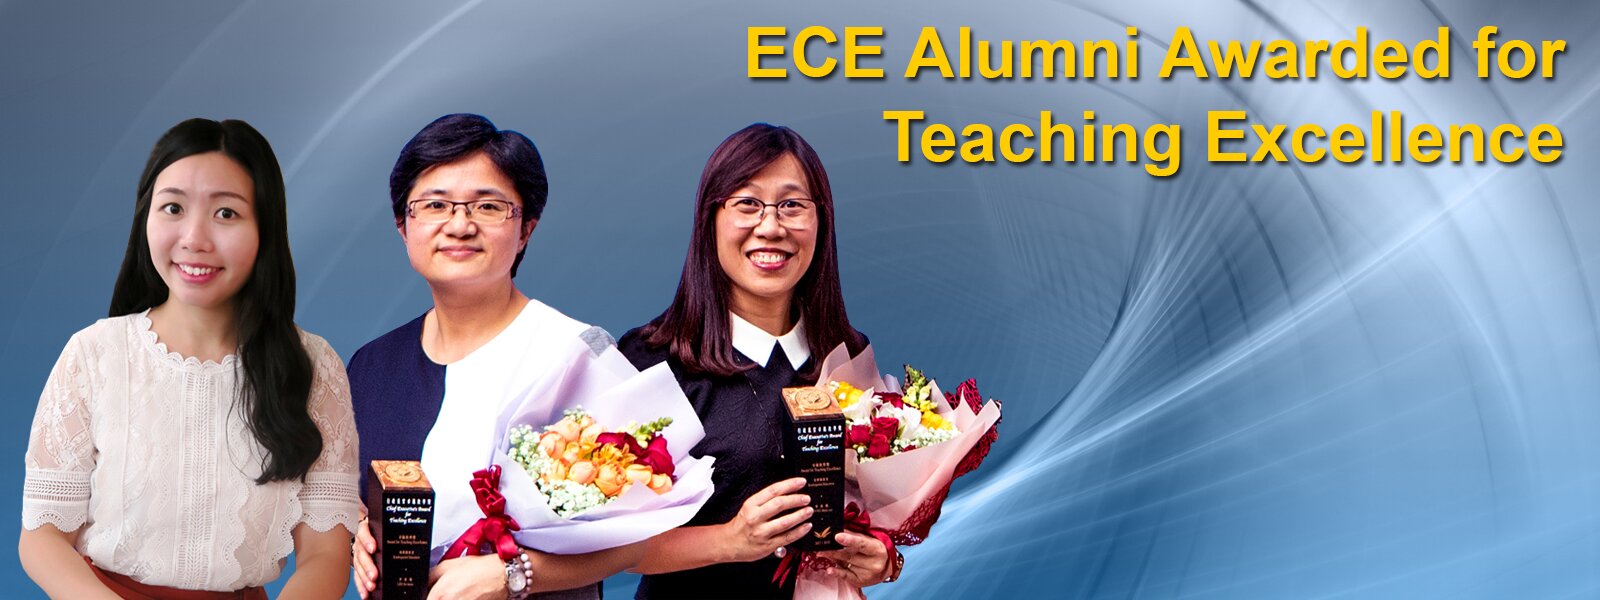 ECE Alumni Awarded for Teaching Excellence